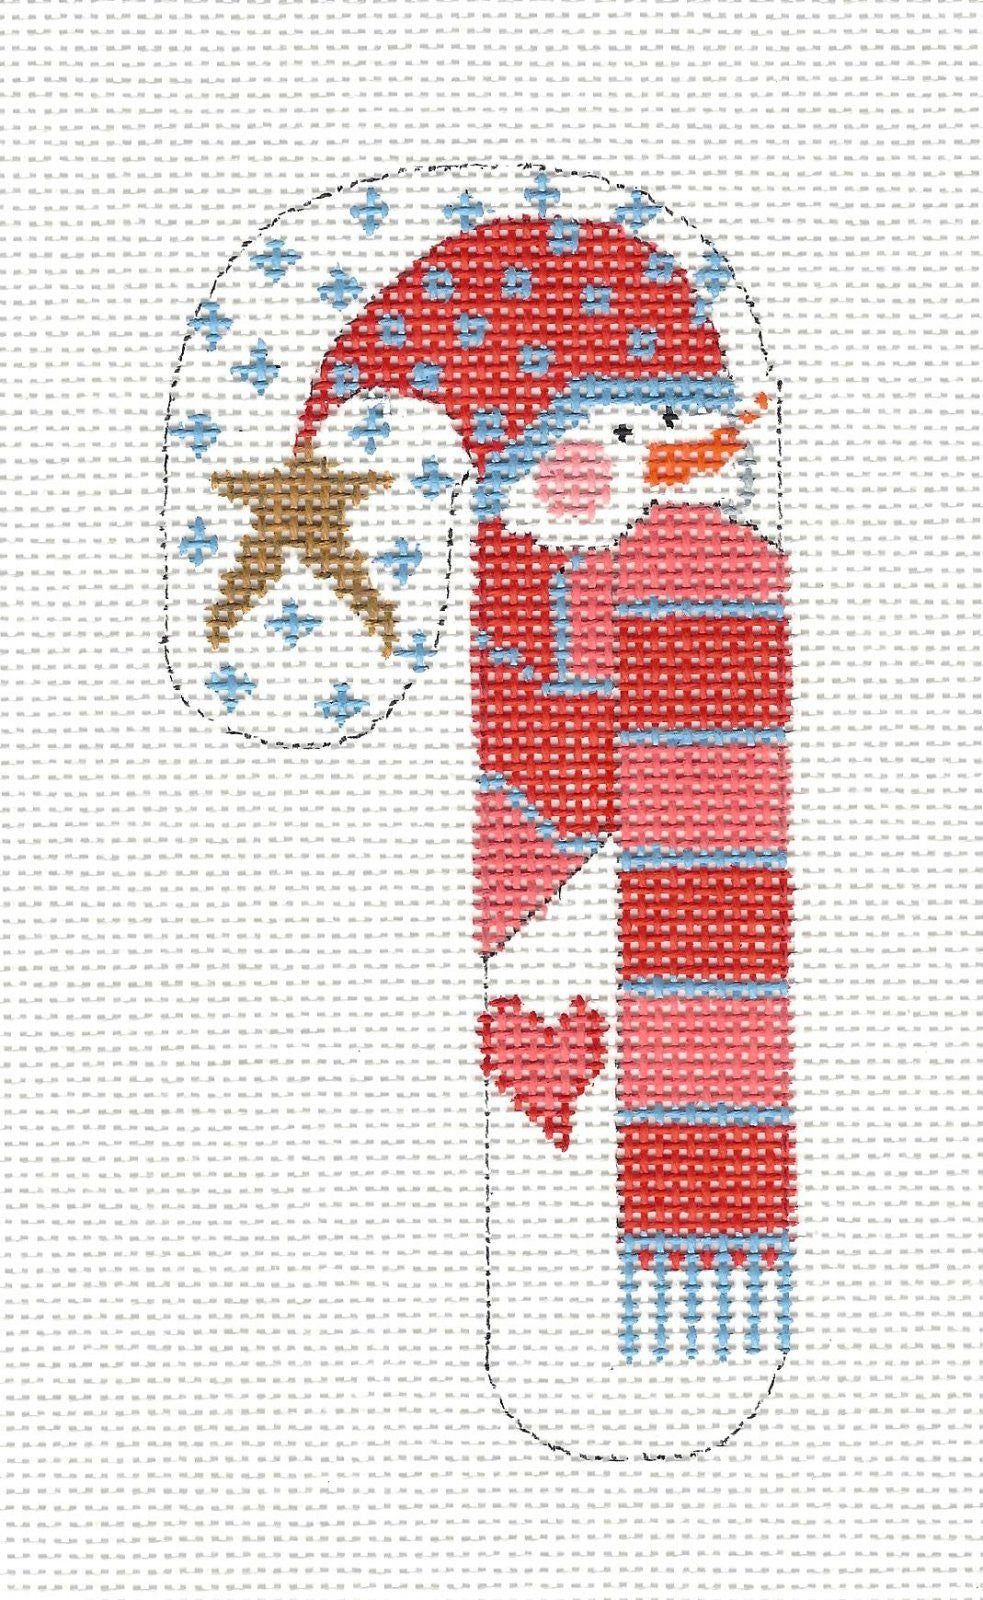 Small Candy Cane Snowman with Red/Peach Scarf on hand painted Needlepoint Canvas~ by Danji Designs